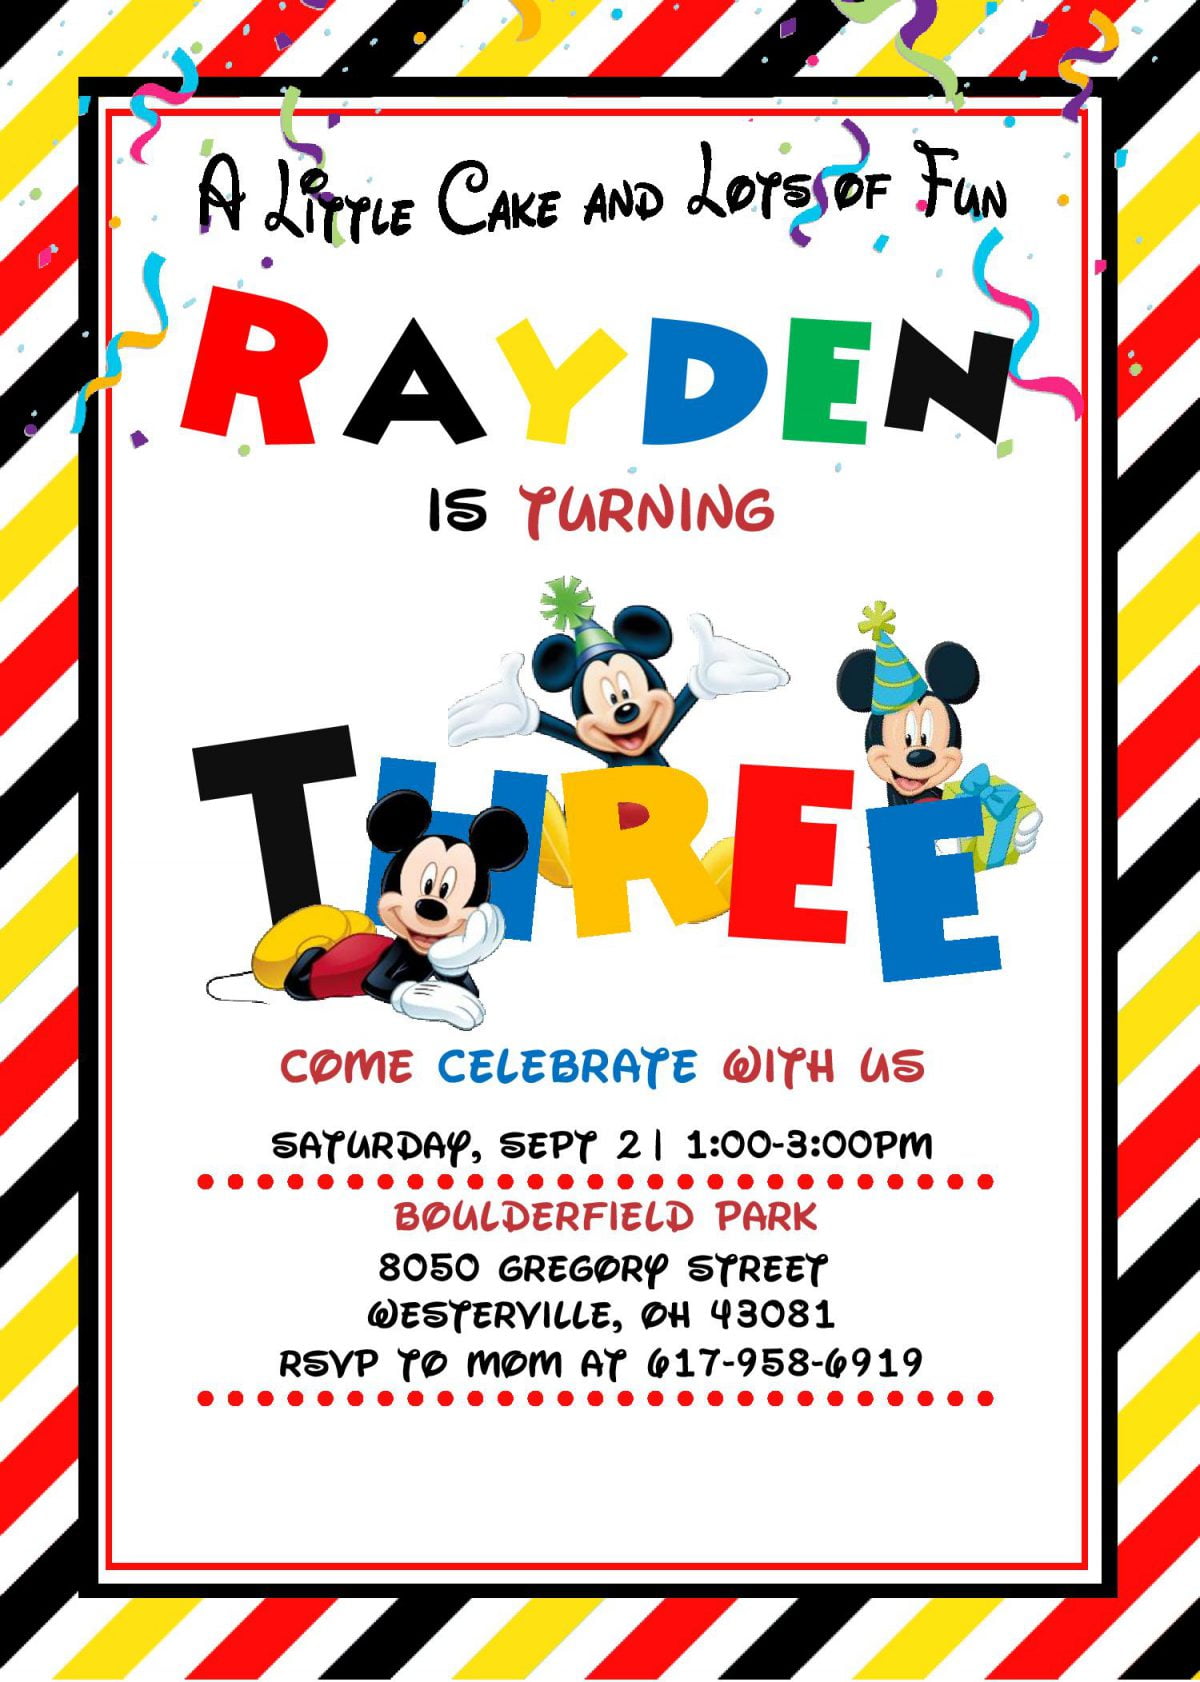 Cute Mickey Mouse Invitation Templates - Editable With MS Word and has cool fonts